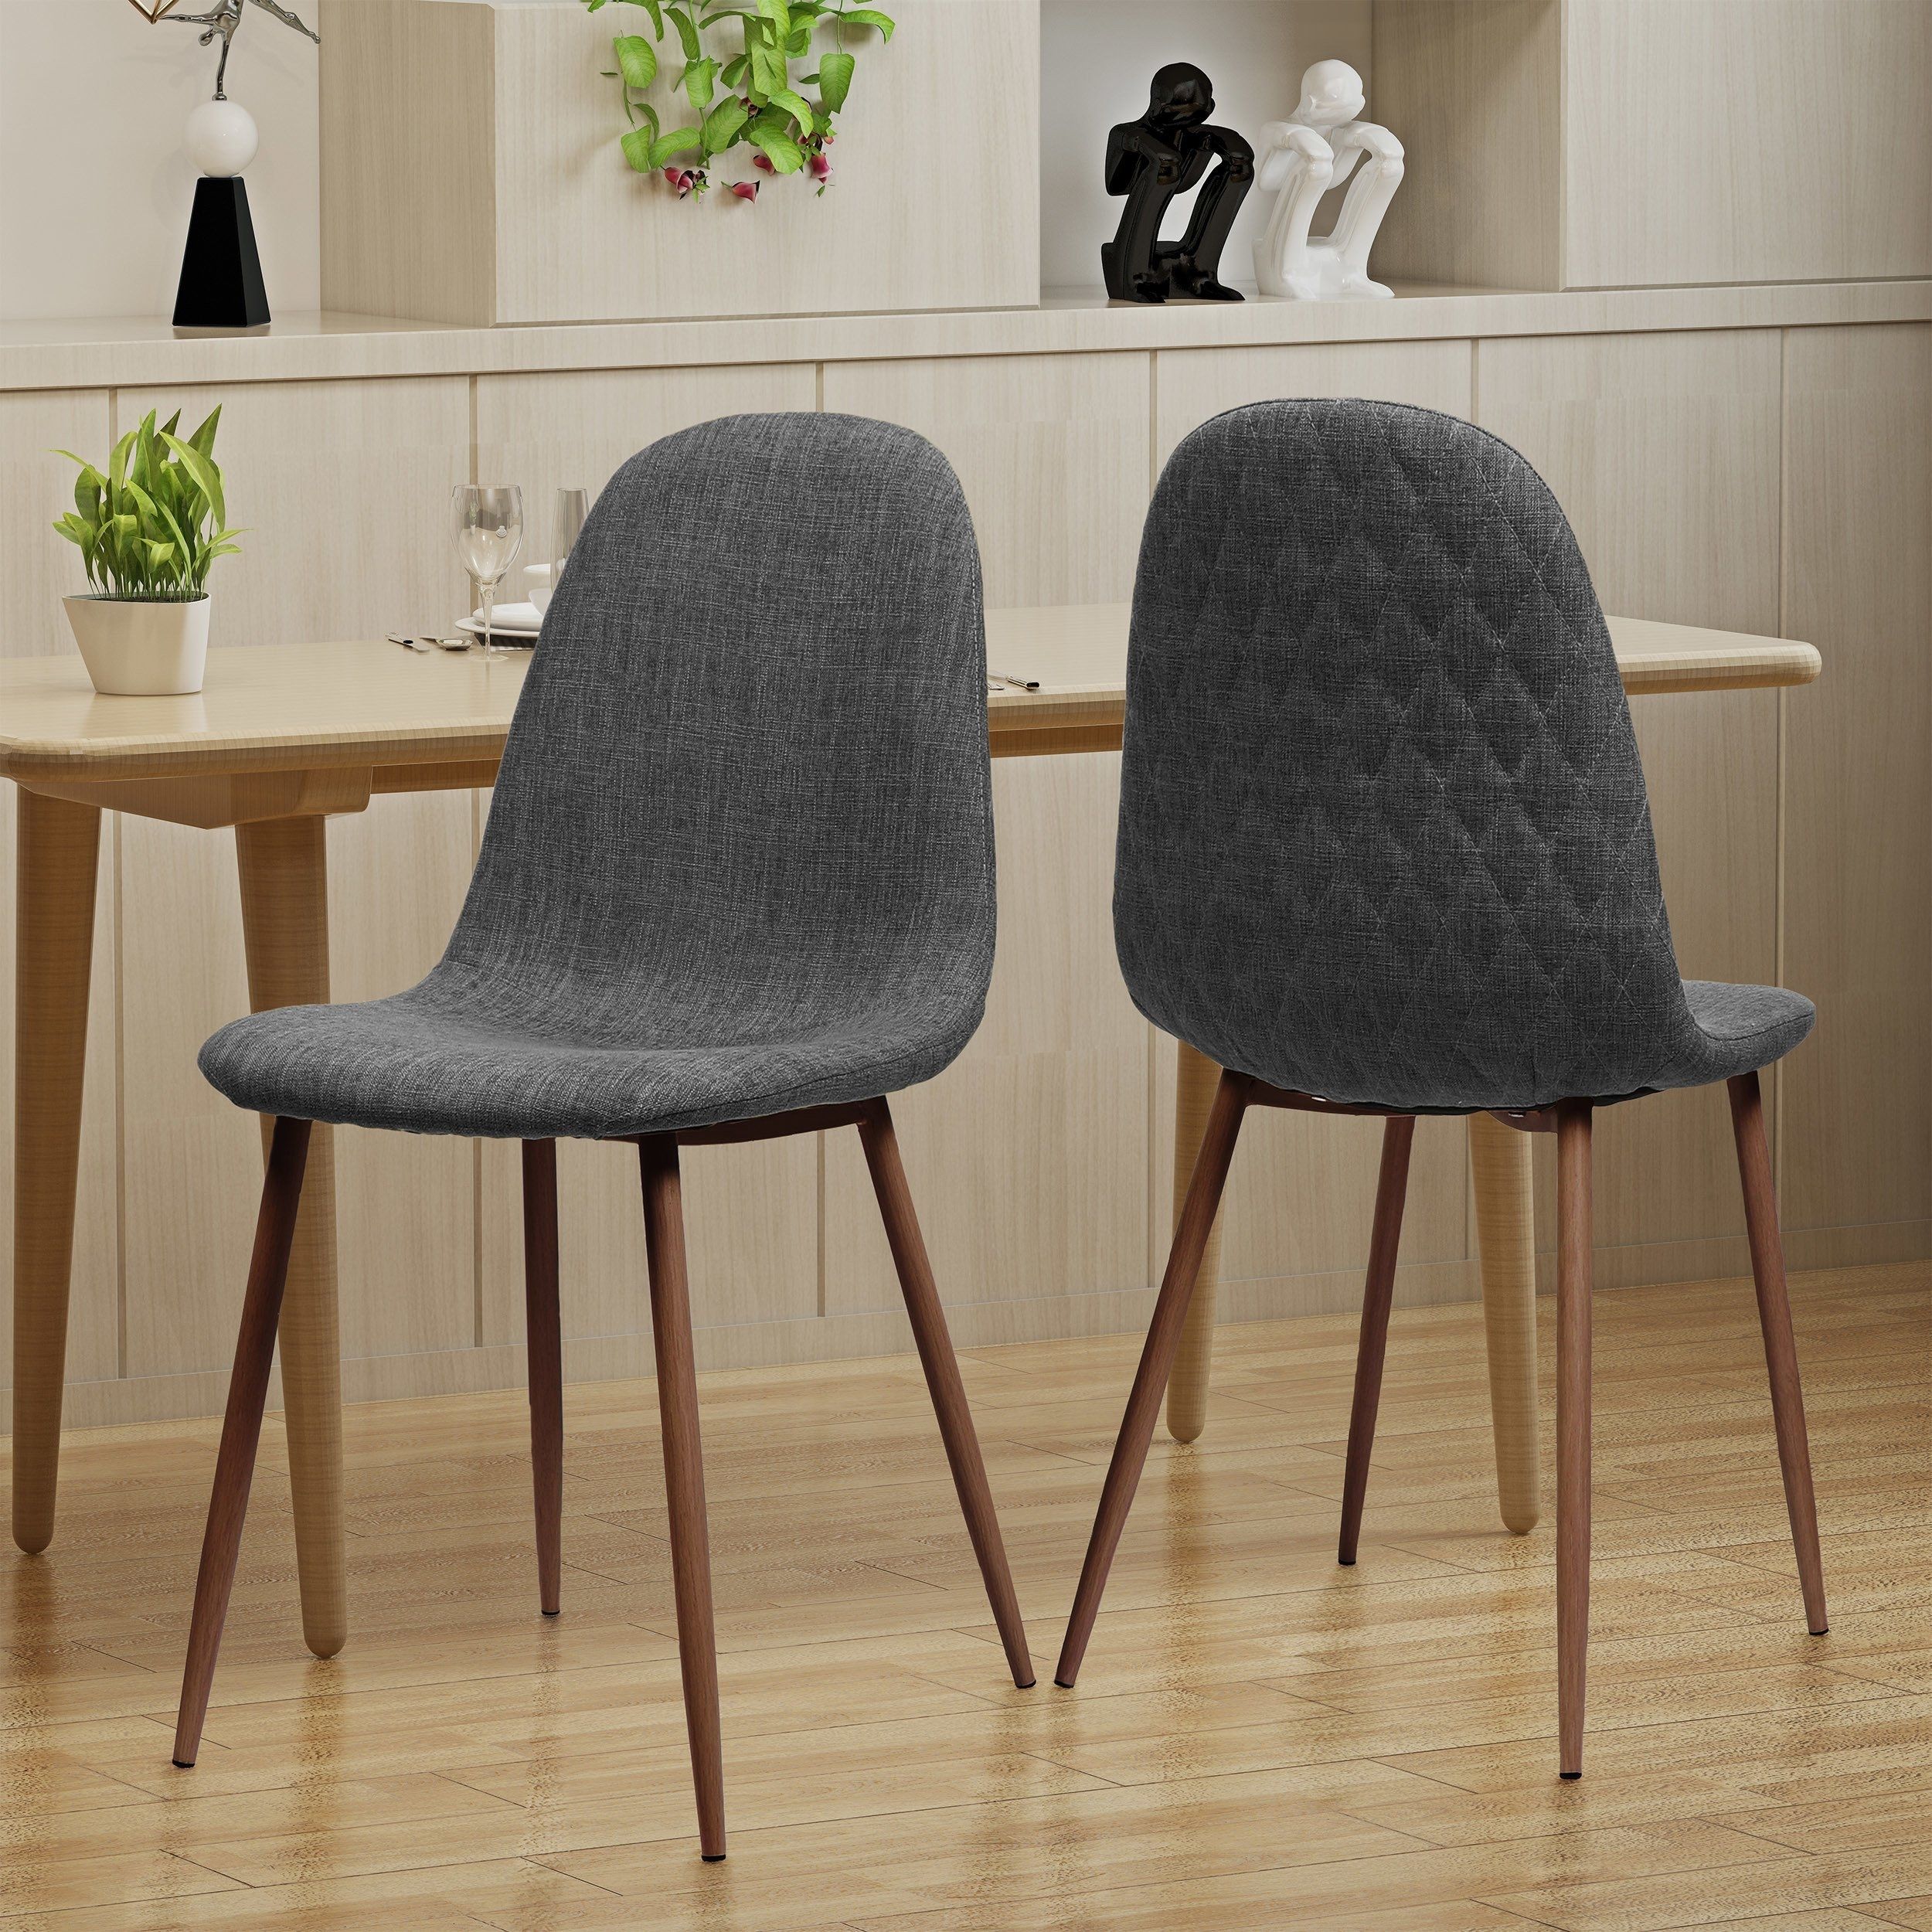 Shop Caden Mid Century Fabric Dining Chair (Set Of 2)Christopher For Most Recently Released Caden 7 Piece Dining Sets With Upholstered Side Chair (View 3 of 20)